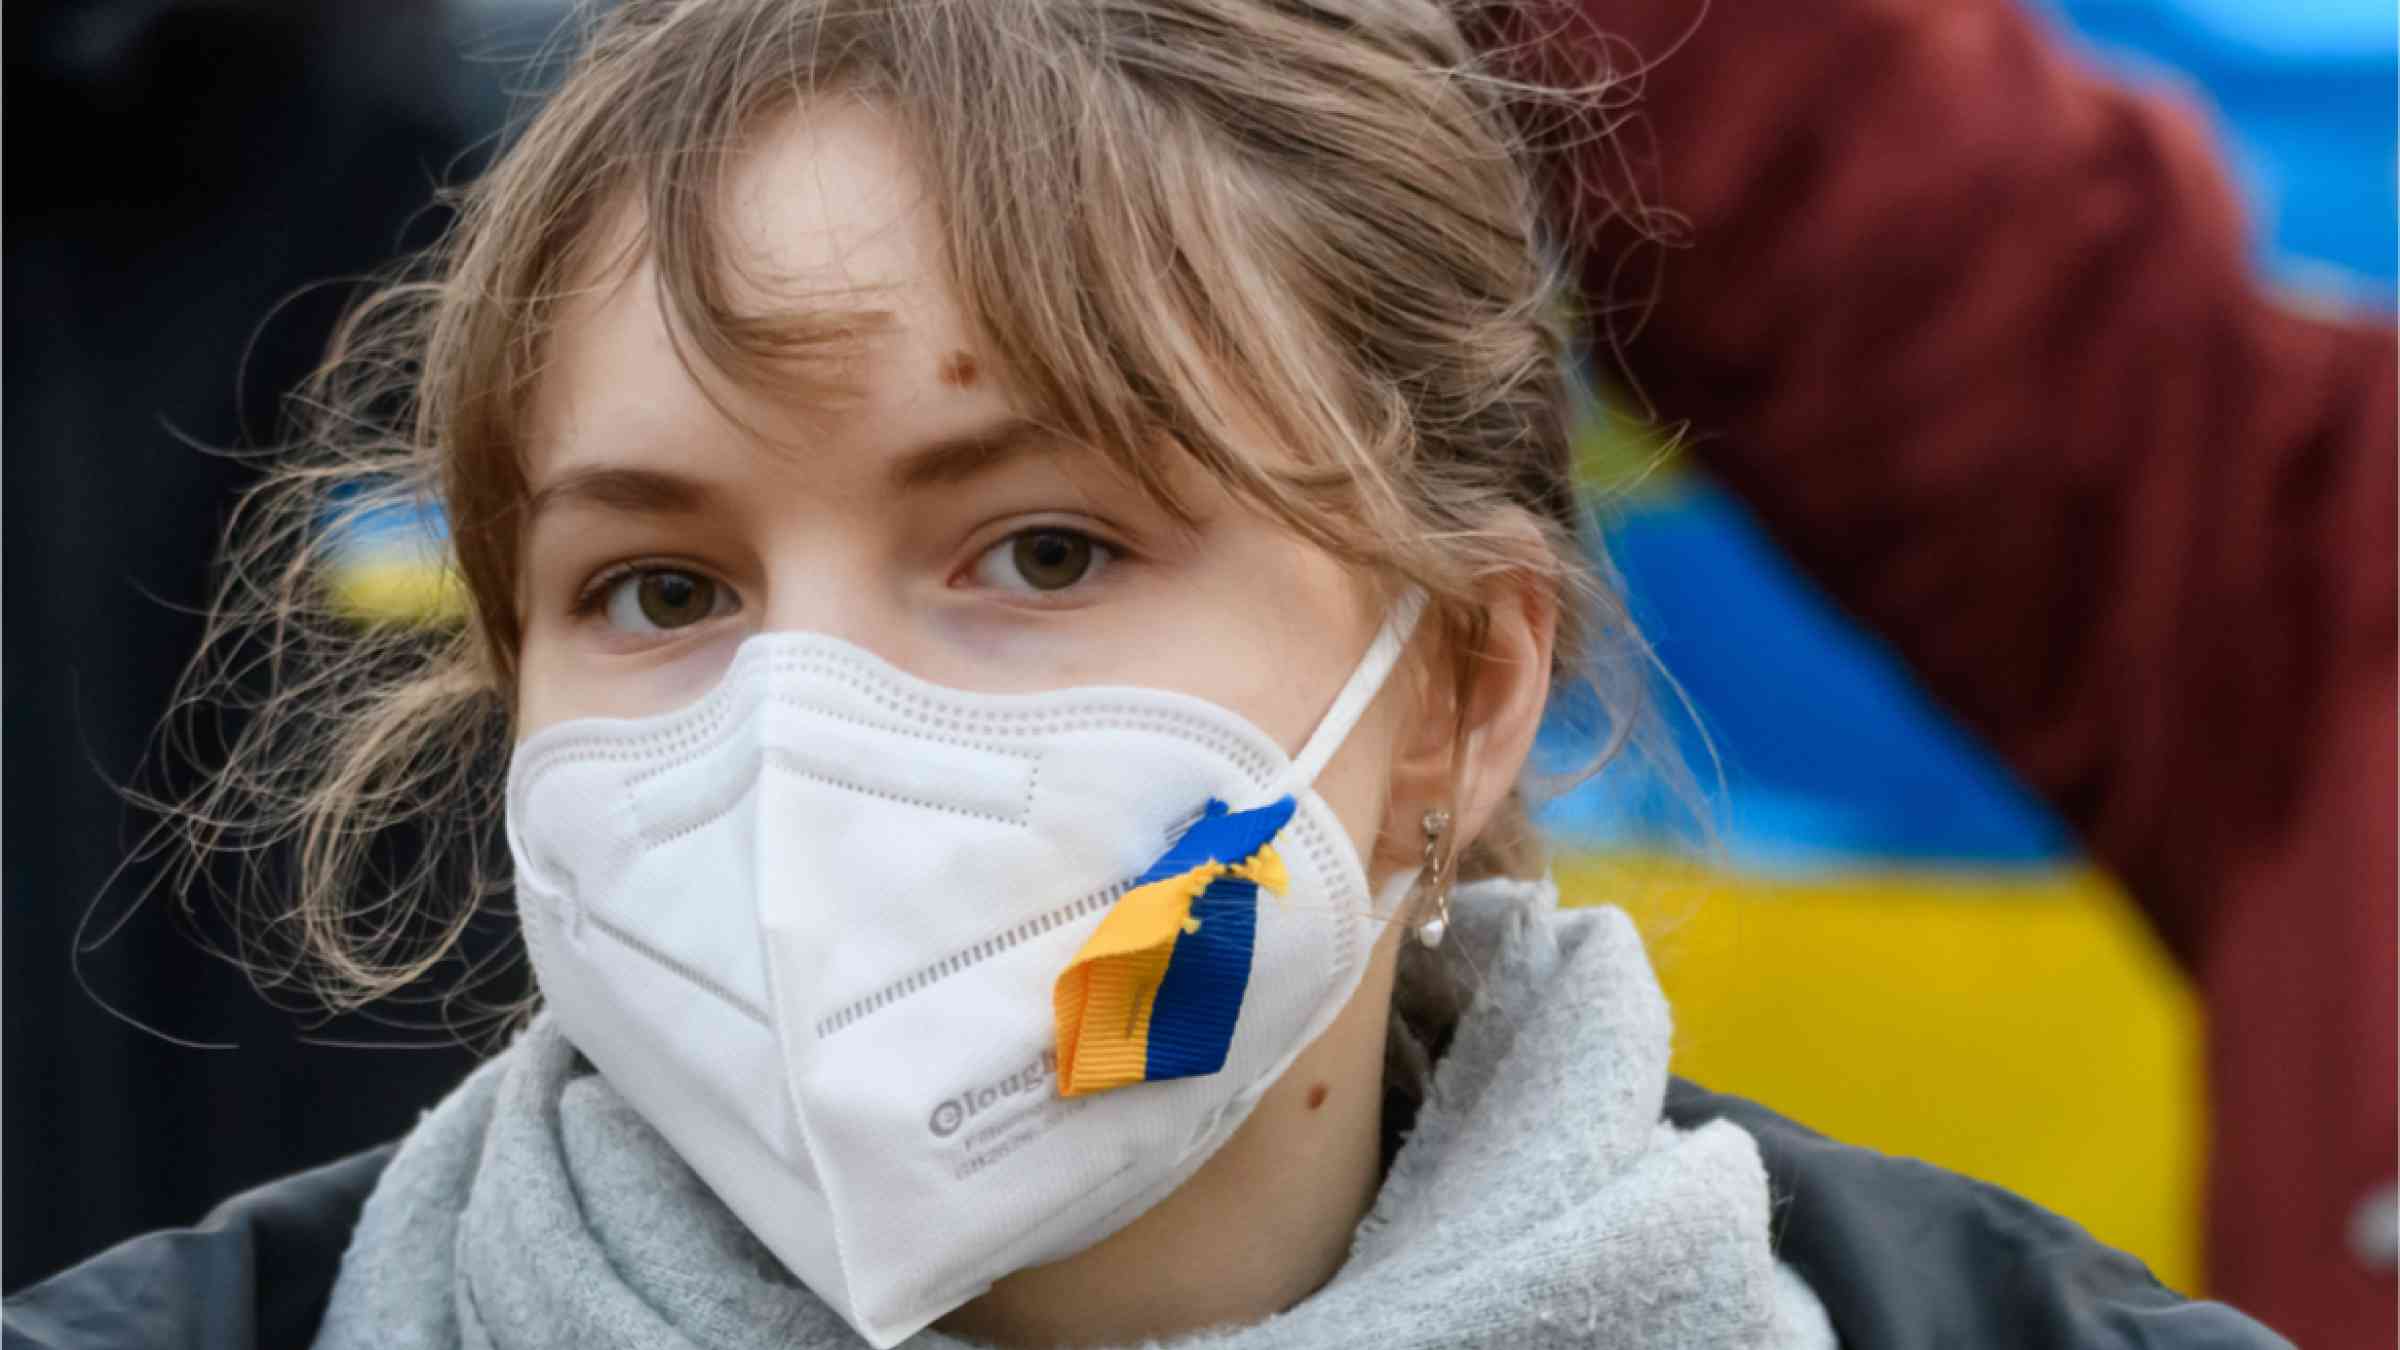 Girl wearing a mask with the Ukrainian flag.